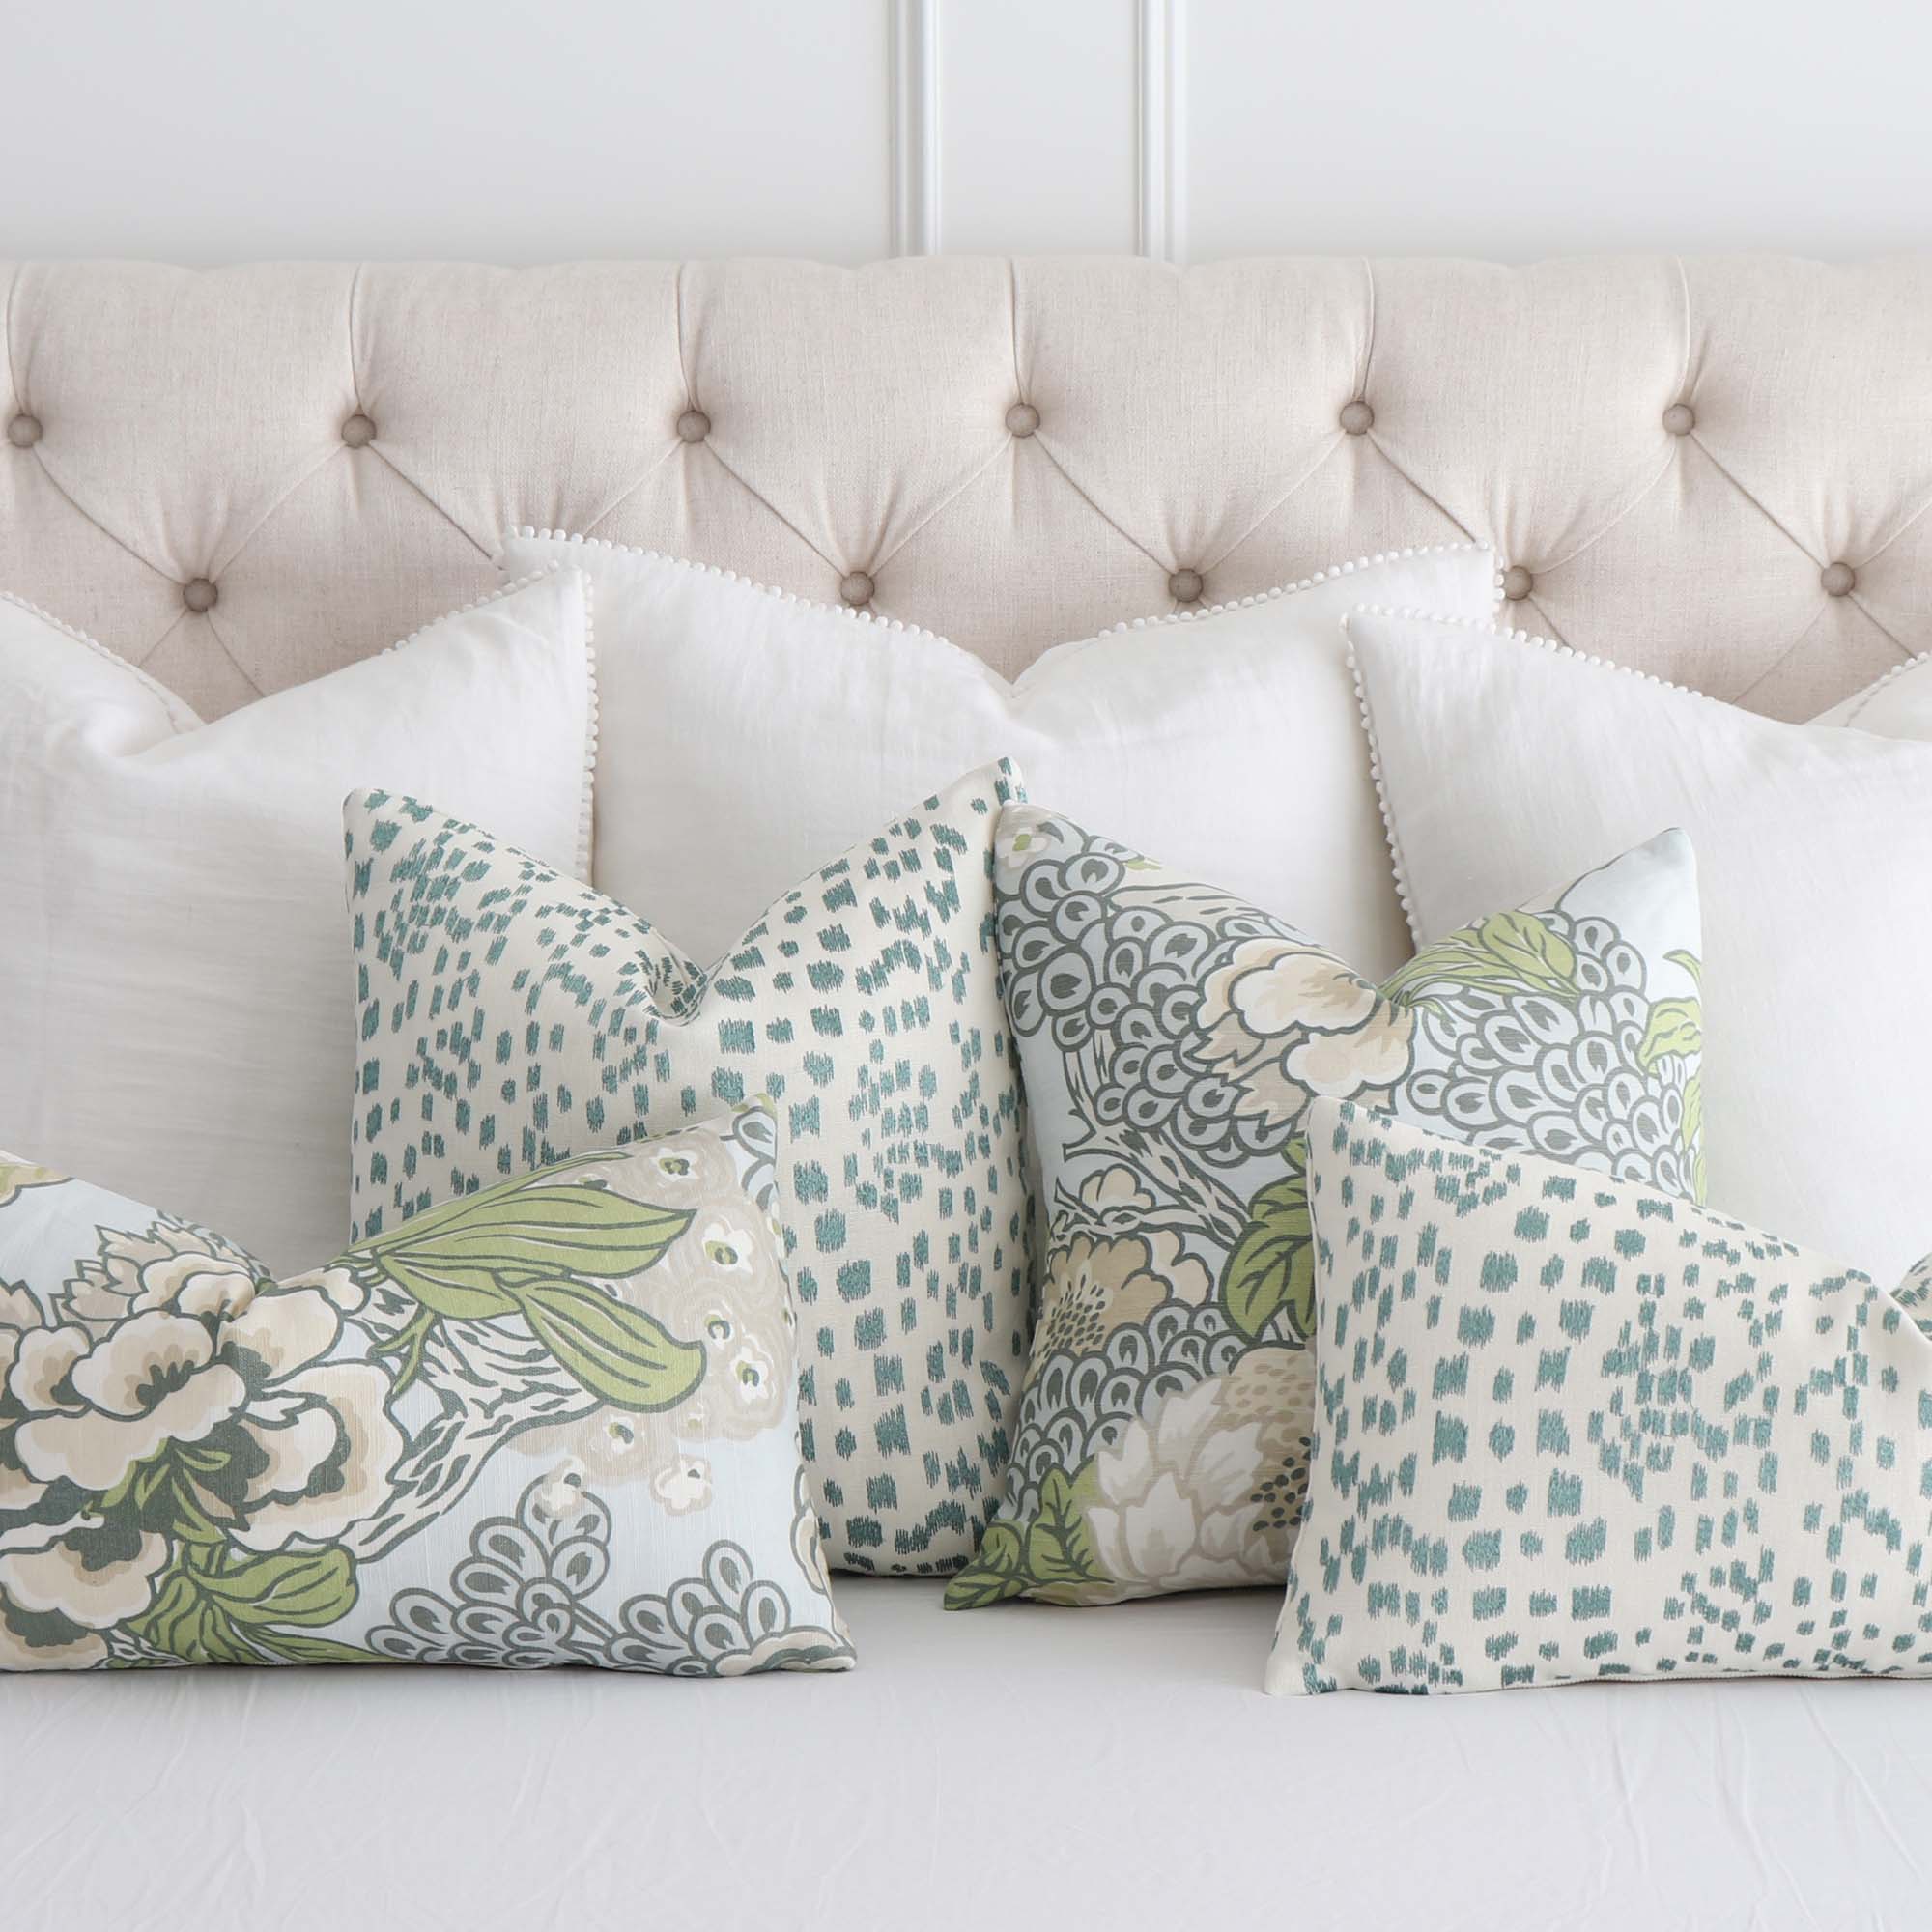 https://www.chloeandolive.com/cdn/shop/products/Brunschwig-Fils-Les-Touches-Embroidered-Jade-8015168.35-Luxury-Designer-Throw-Pillow-Cover-With-Matching-Pillows_2000x.jpg?v=1618099186